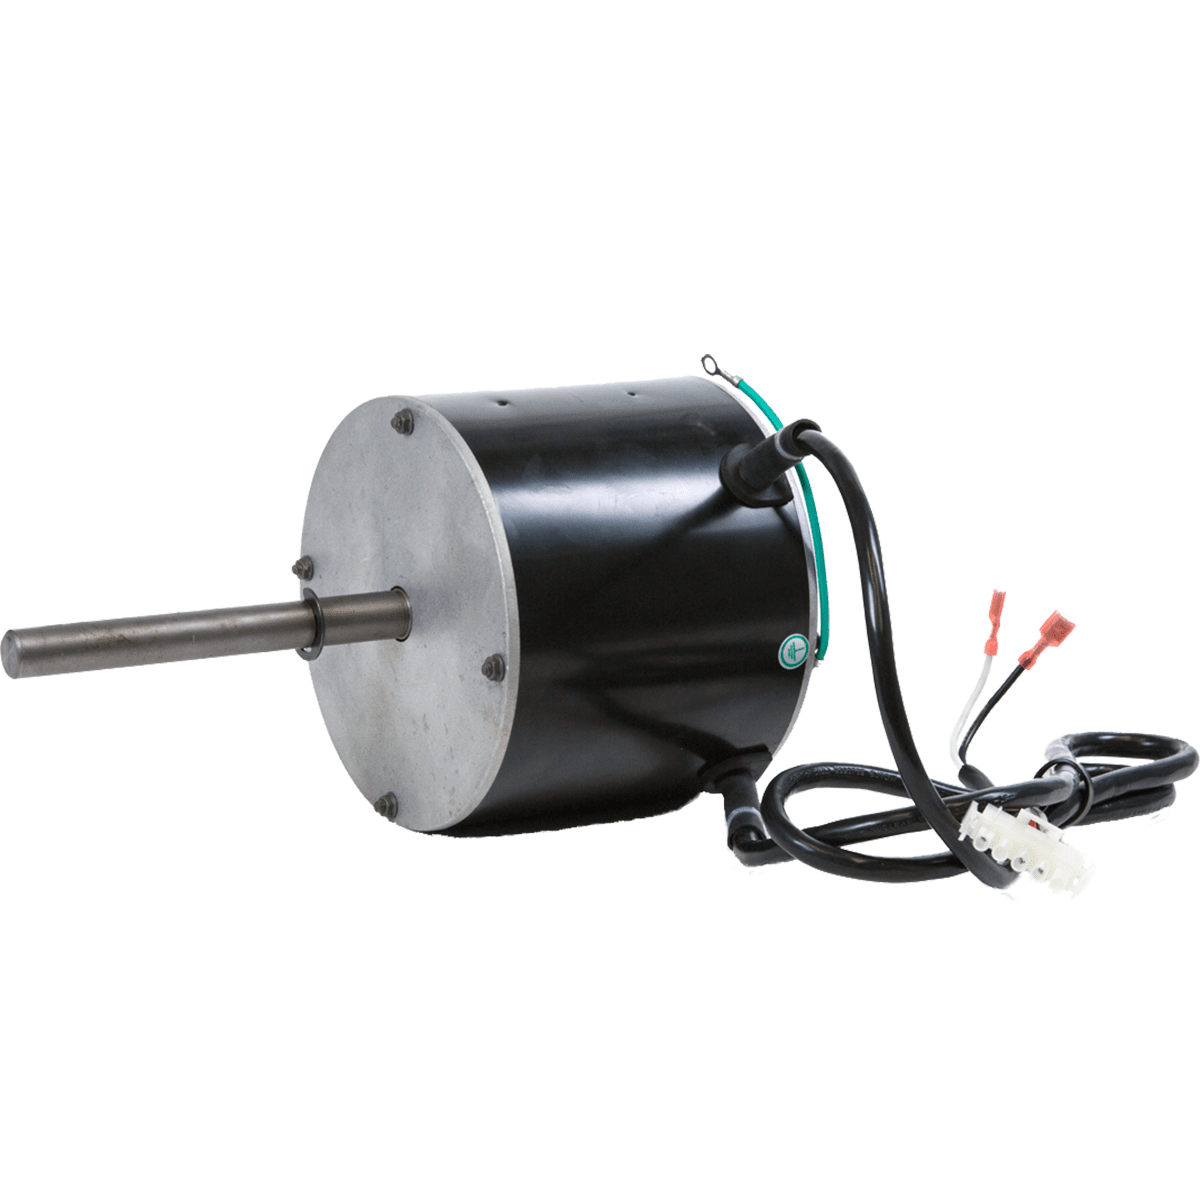 Portacool Replacement Motor For Cyclone 130